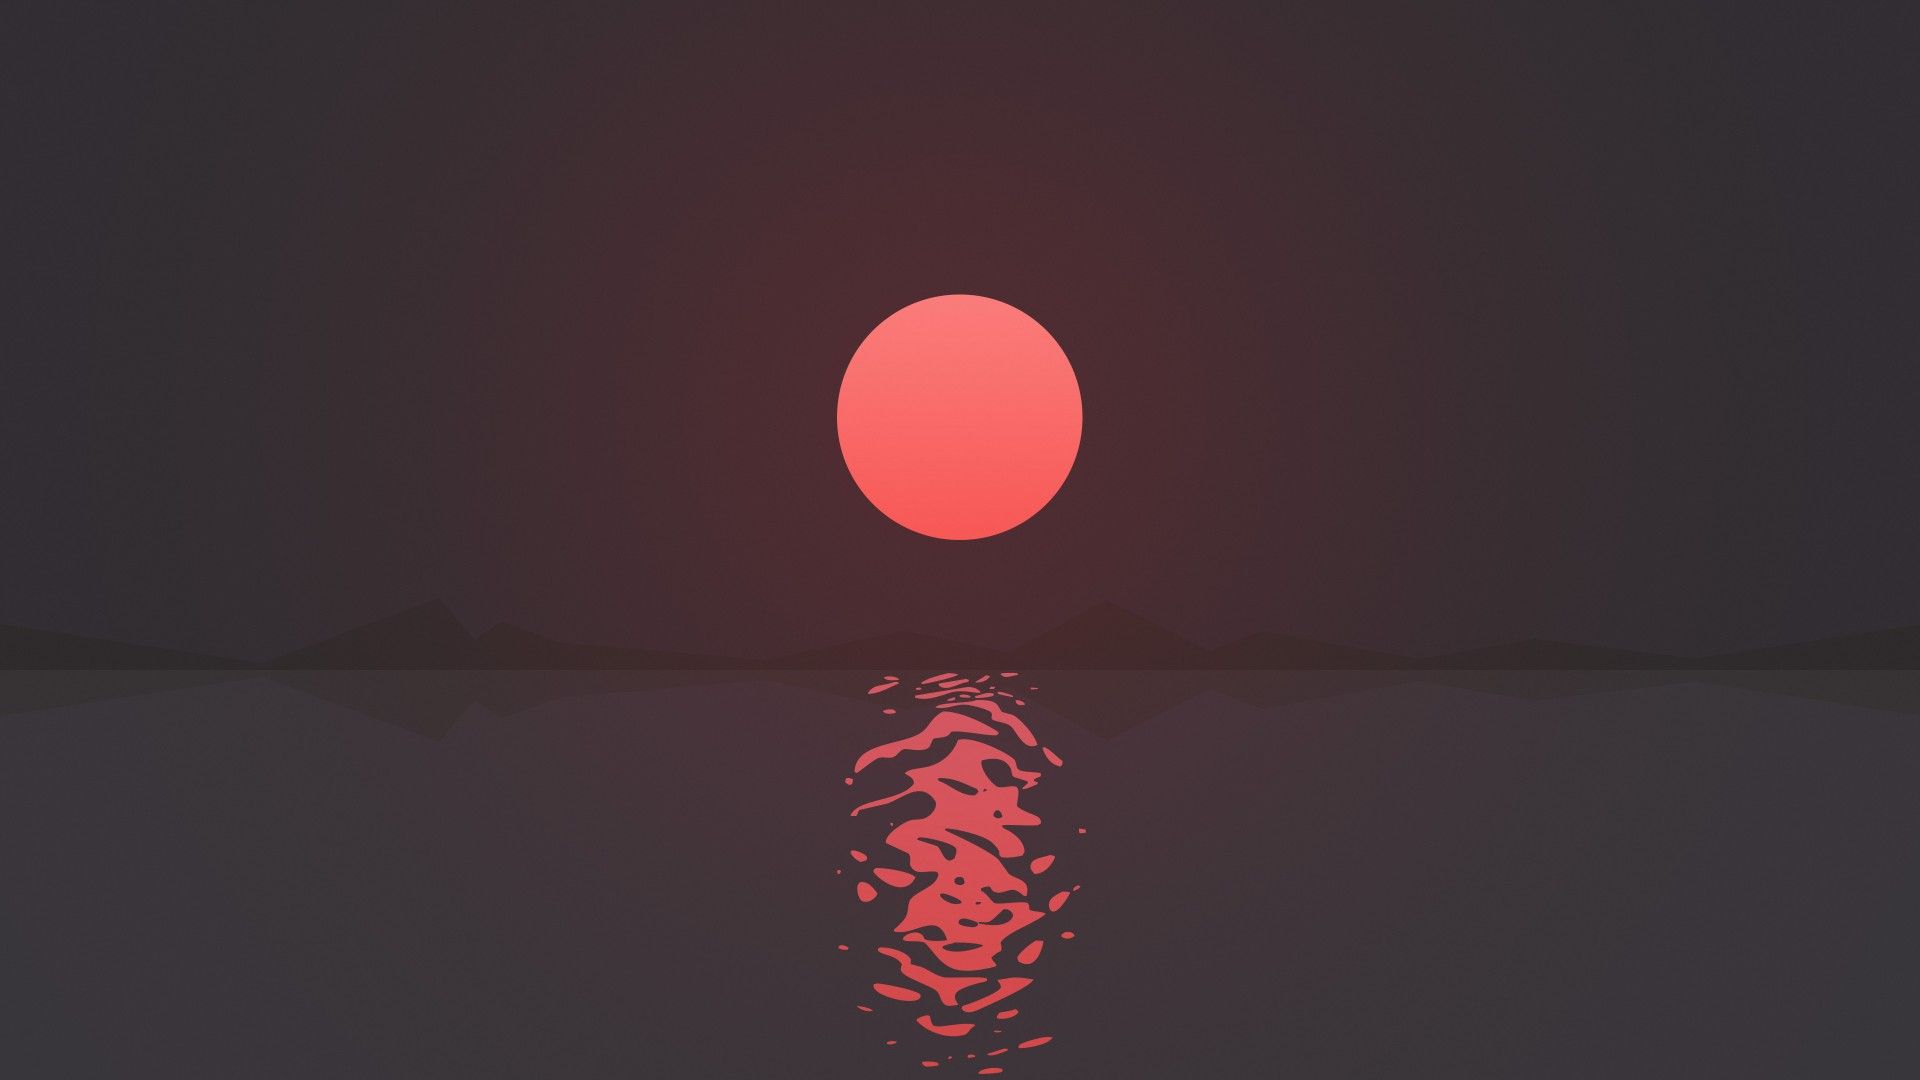 Need some help animating this water for a wallpaper. I also added an audio visualizer (or whatever they're called) to it already. Any help would be incredible!